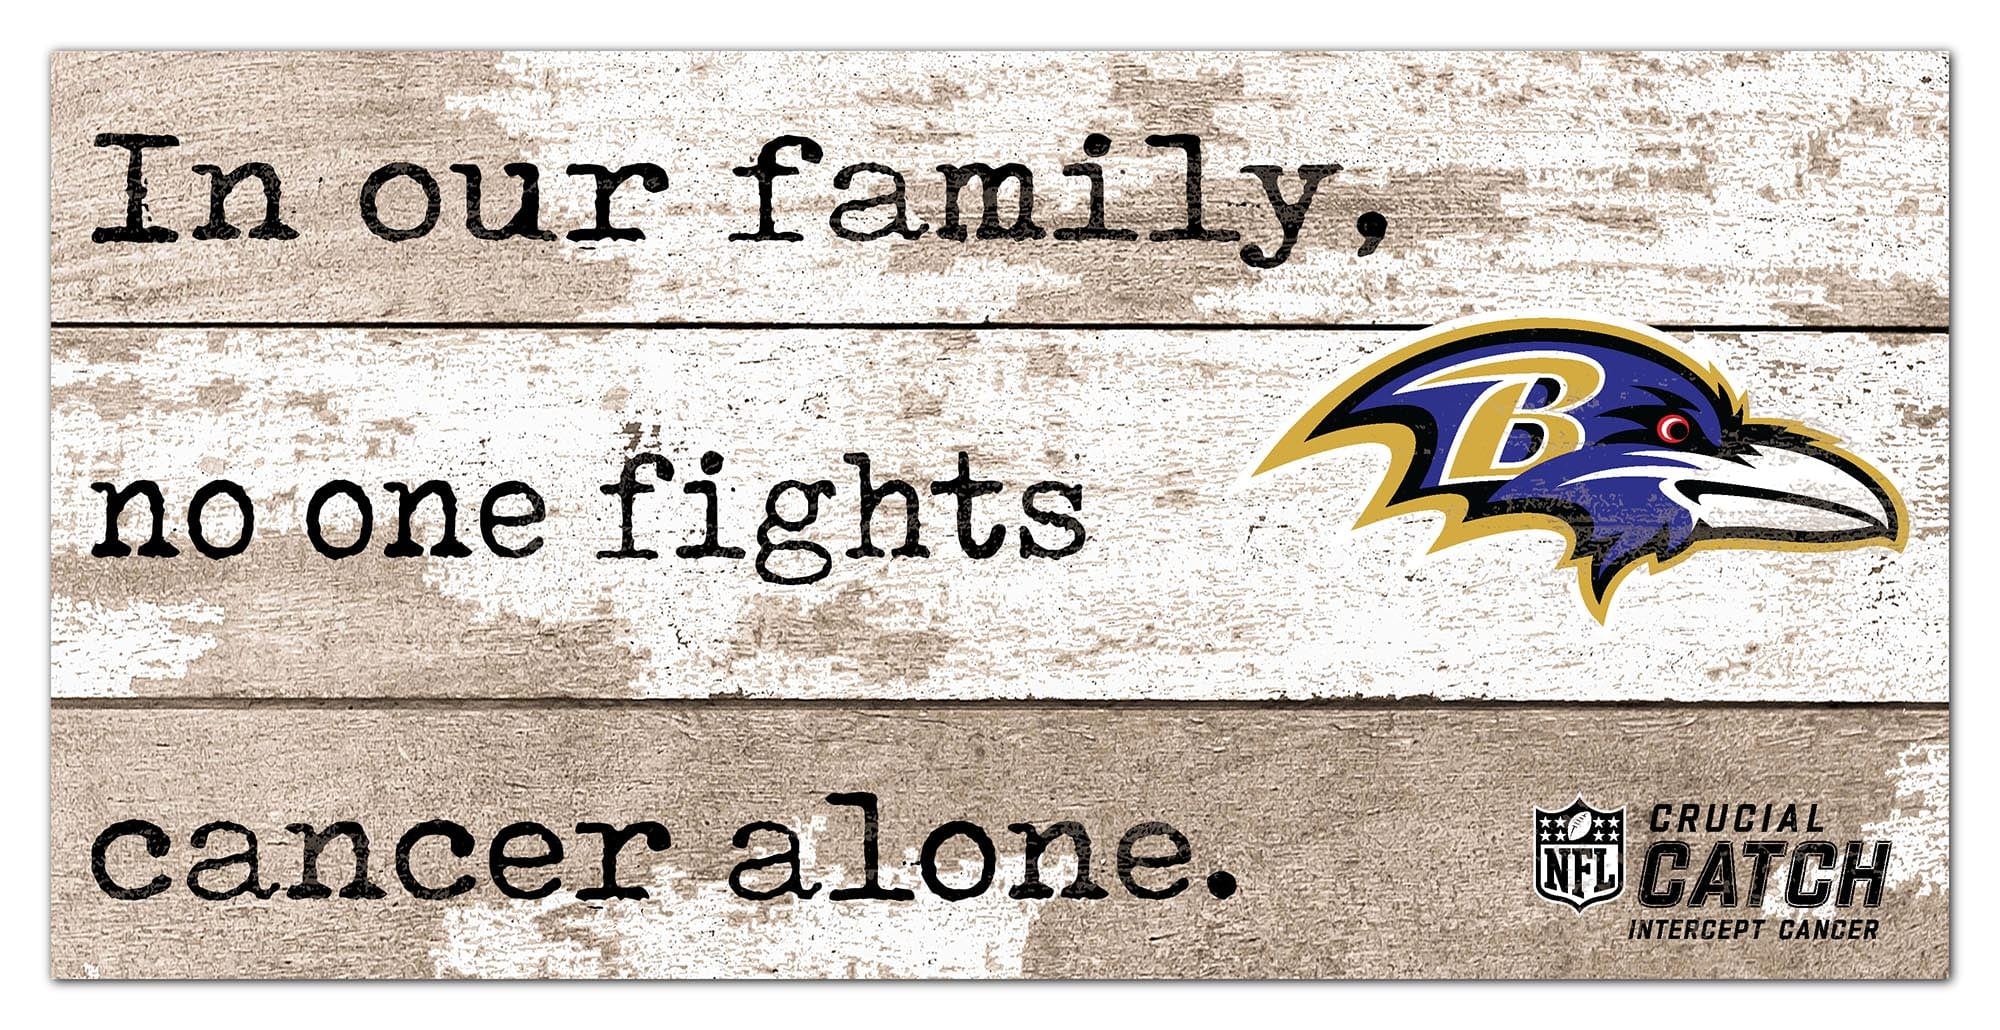 Baltimore Ravens NFL Crucial Catch Intercept Cancer Your Fight is